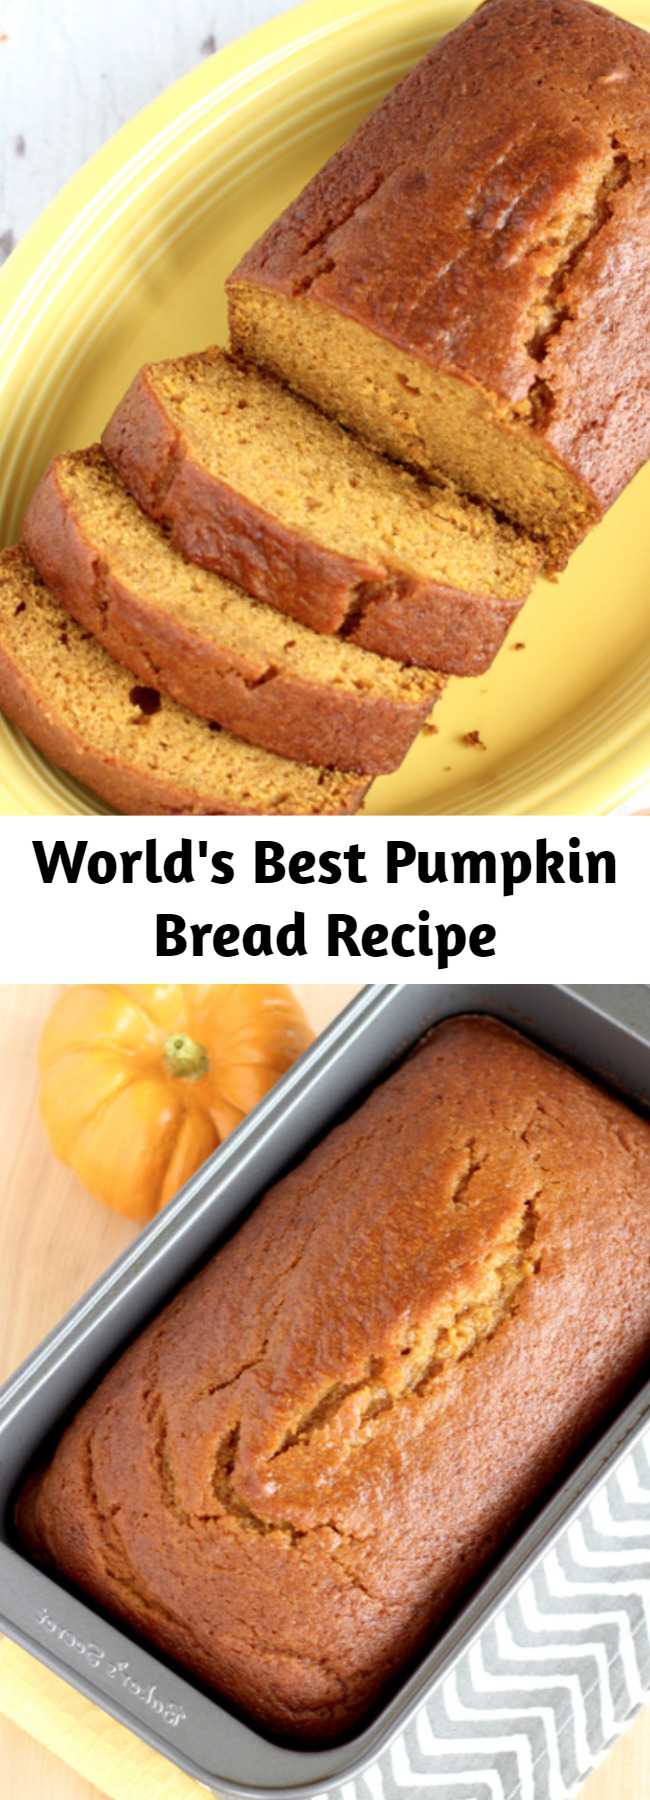 World's Best Pumpkin Bread Recipe - Get ready for a little Pumpkin bliss with this World’s Best Pumpkin Bread Recipe! Seriously… it’s even better than Starbucks!  And you can keep it easy using Libby’s Pumpkin from the can!  Or… get wild and crazy and make your own homemade pumpkin puree from your backyard garden pumpkins! The choice is yours!